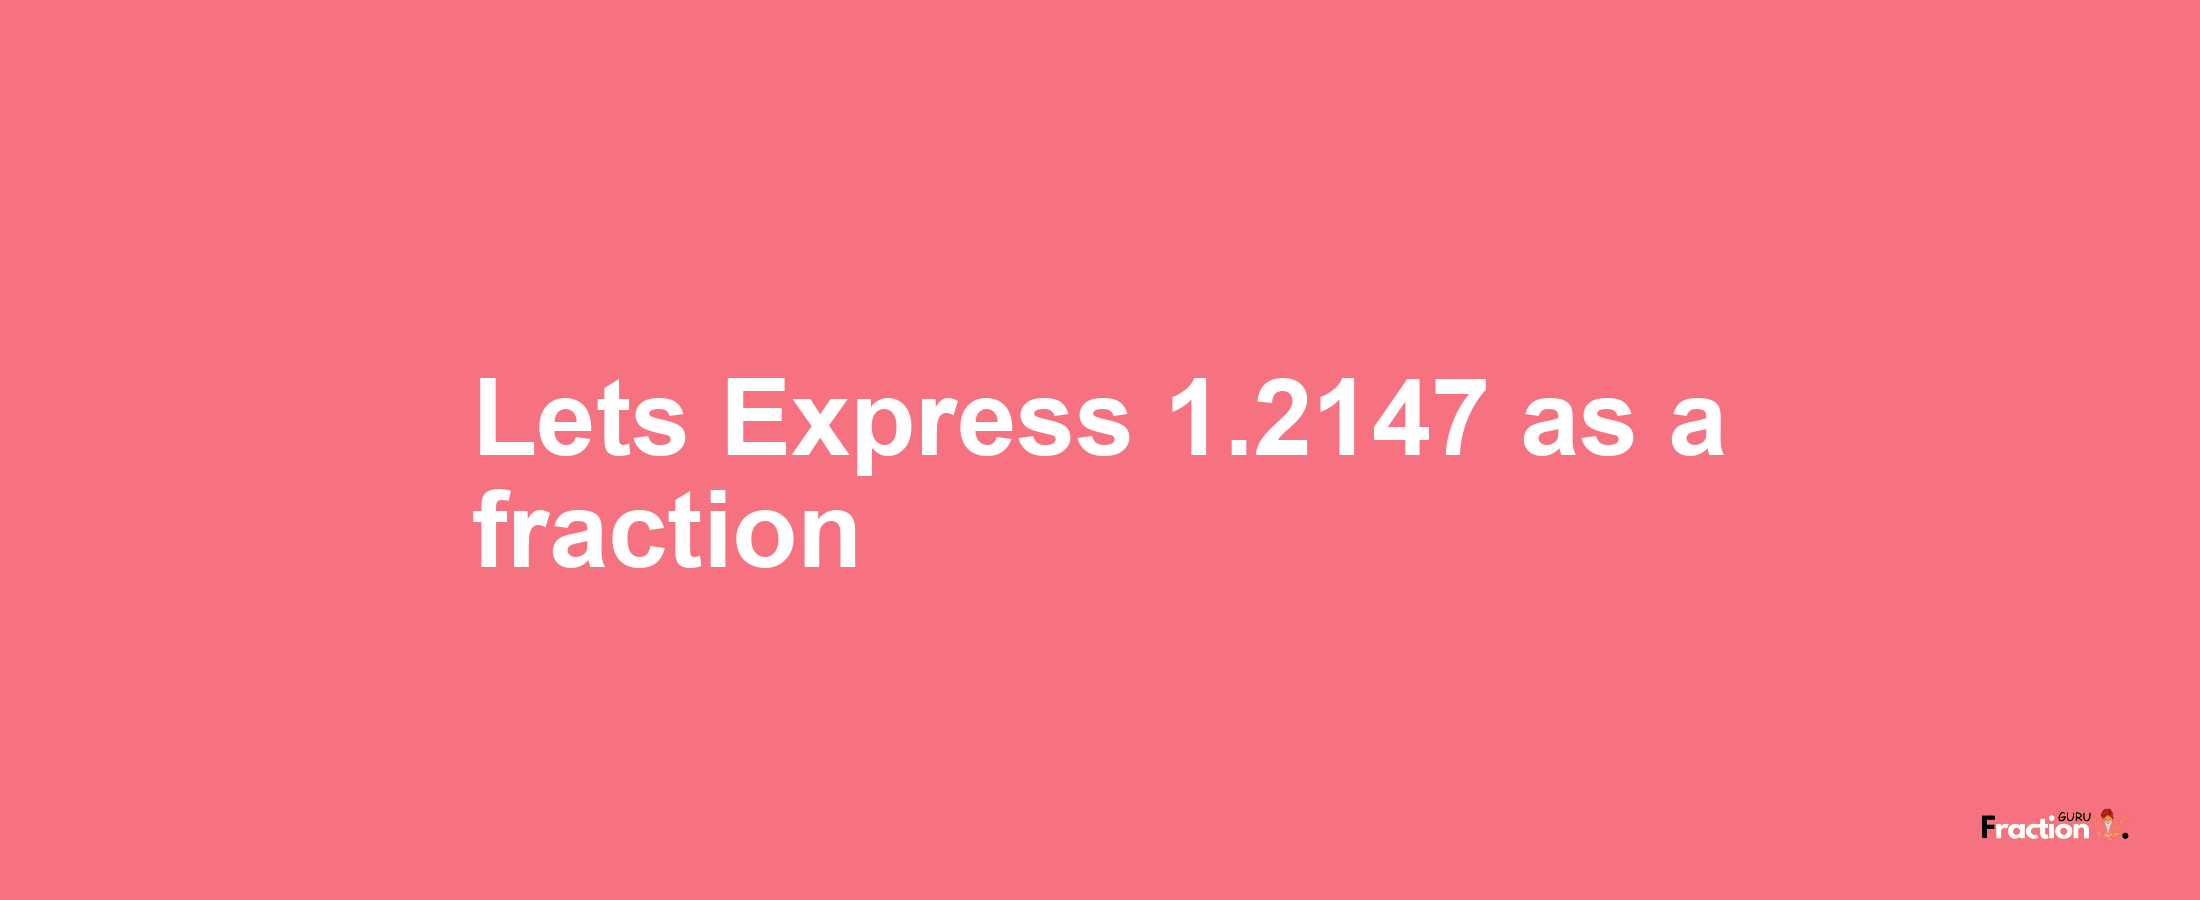 Lets Express 1.2147 as afraction